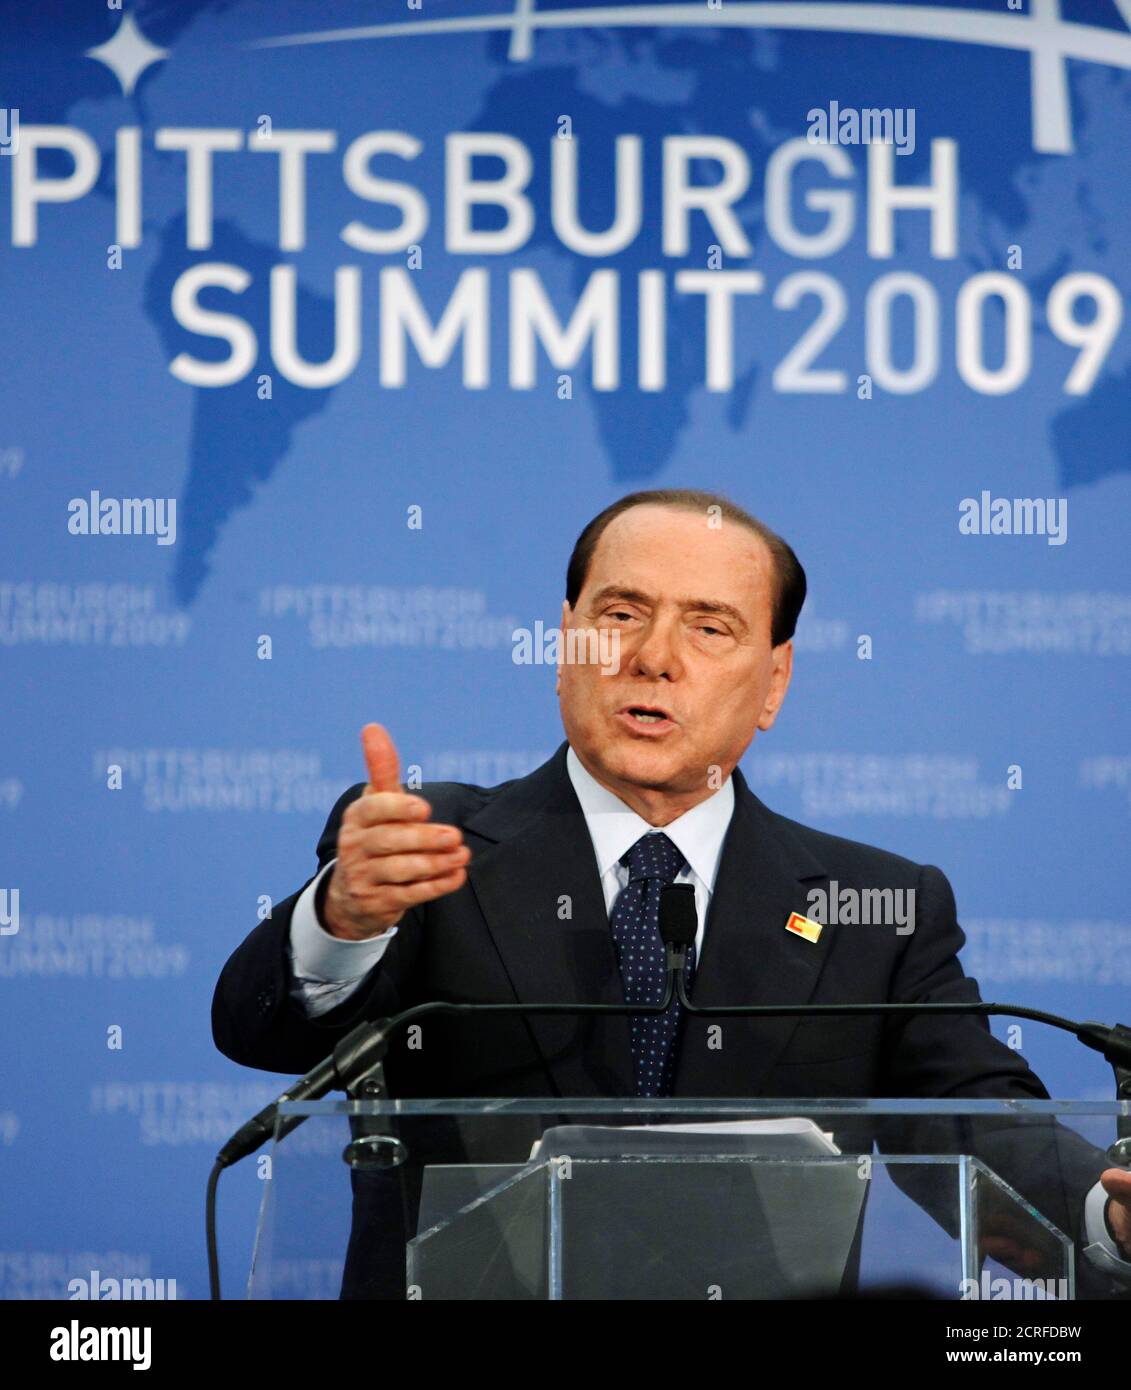 Italy's Prime Minister Silvio Berlusconi speaks about the results of the G20 Summit at a post summit news conference after the conclusion of the summit in the Pittsburgh Convention Center in Pittsburgh, Pennsylvania, September 25, 2009. REUTERS/Jim Bourg (UNITED STATES POLITICS) Stock Photo